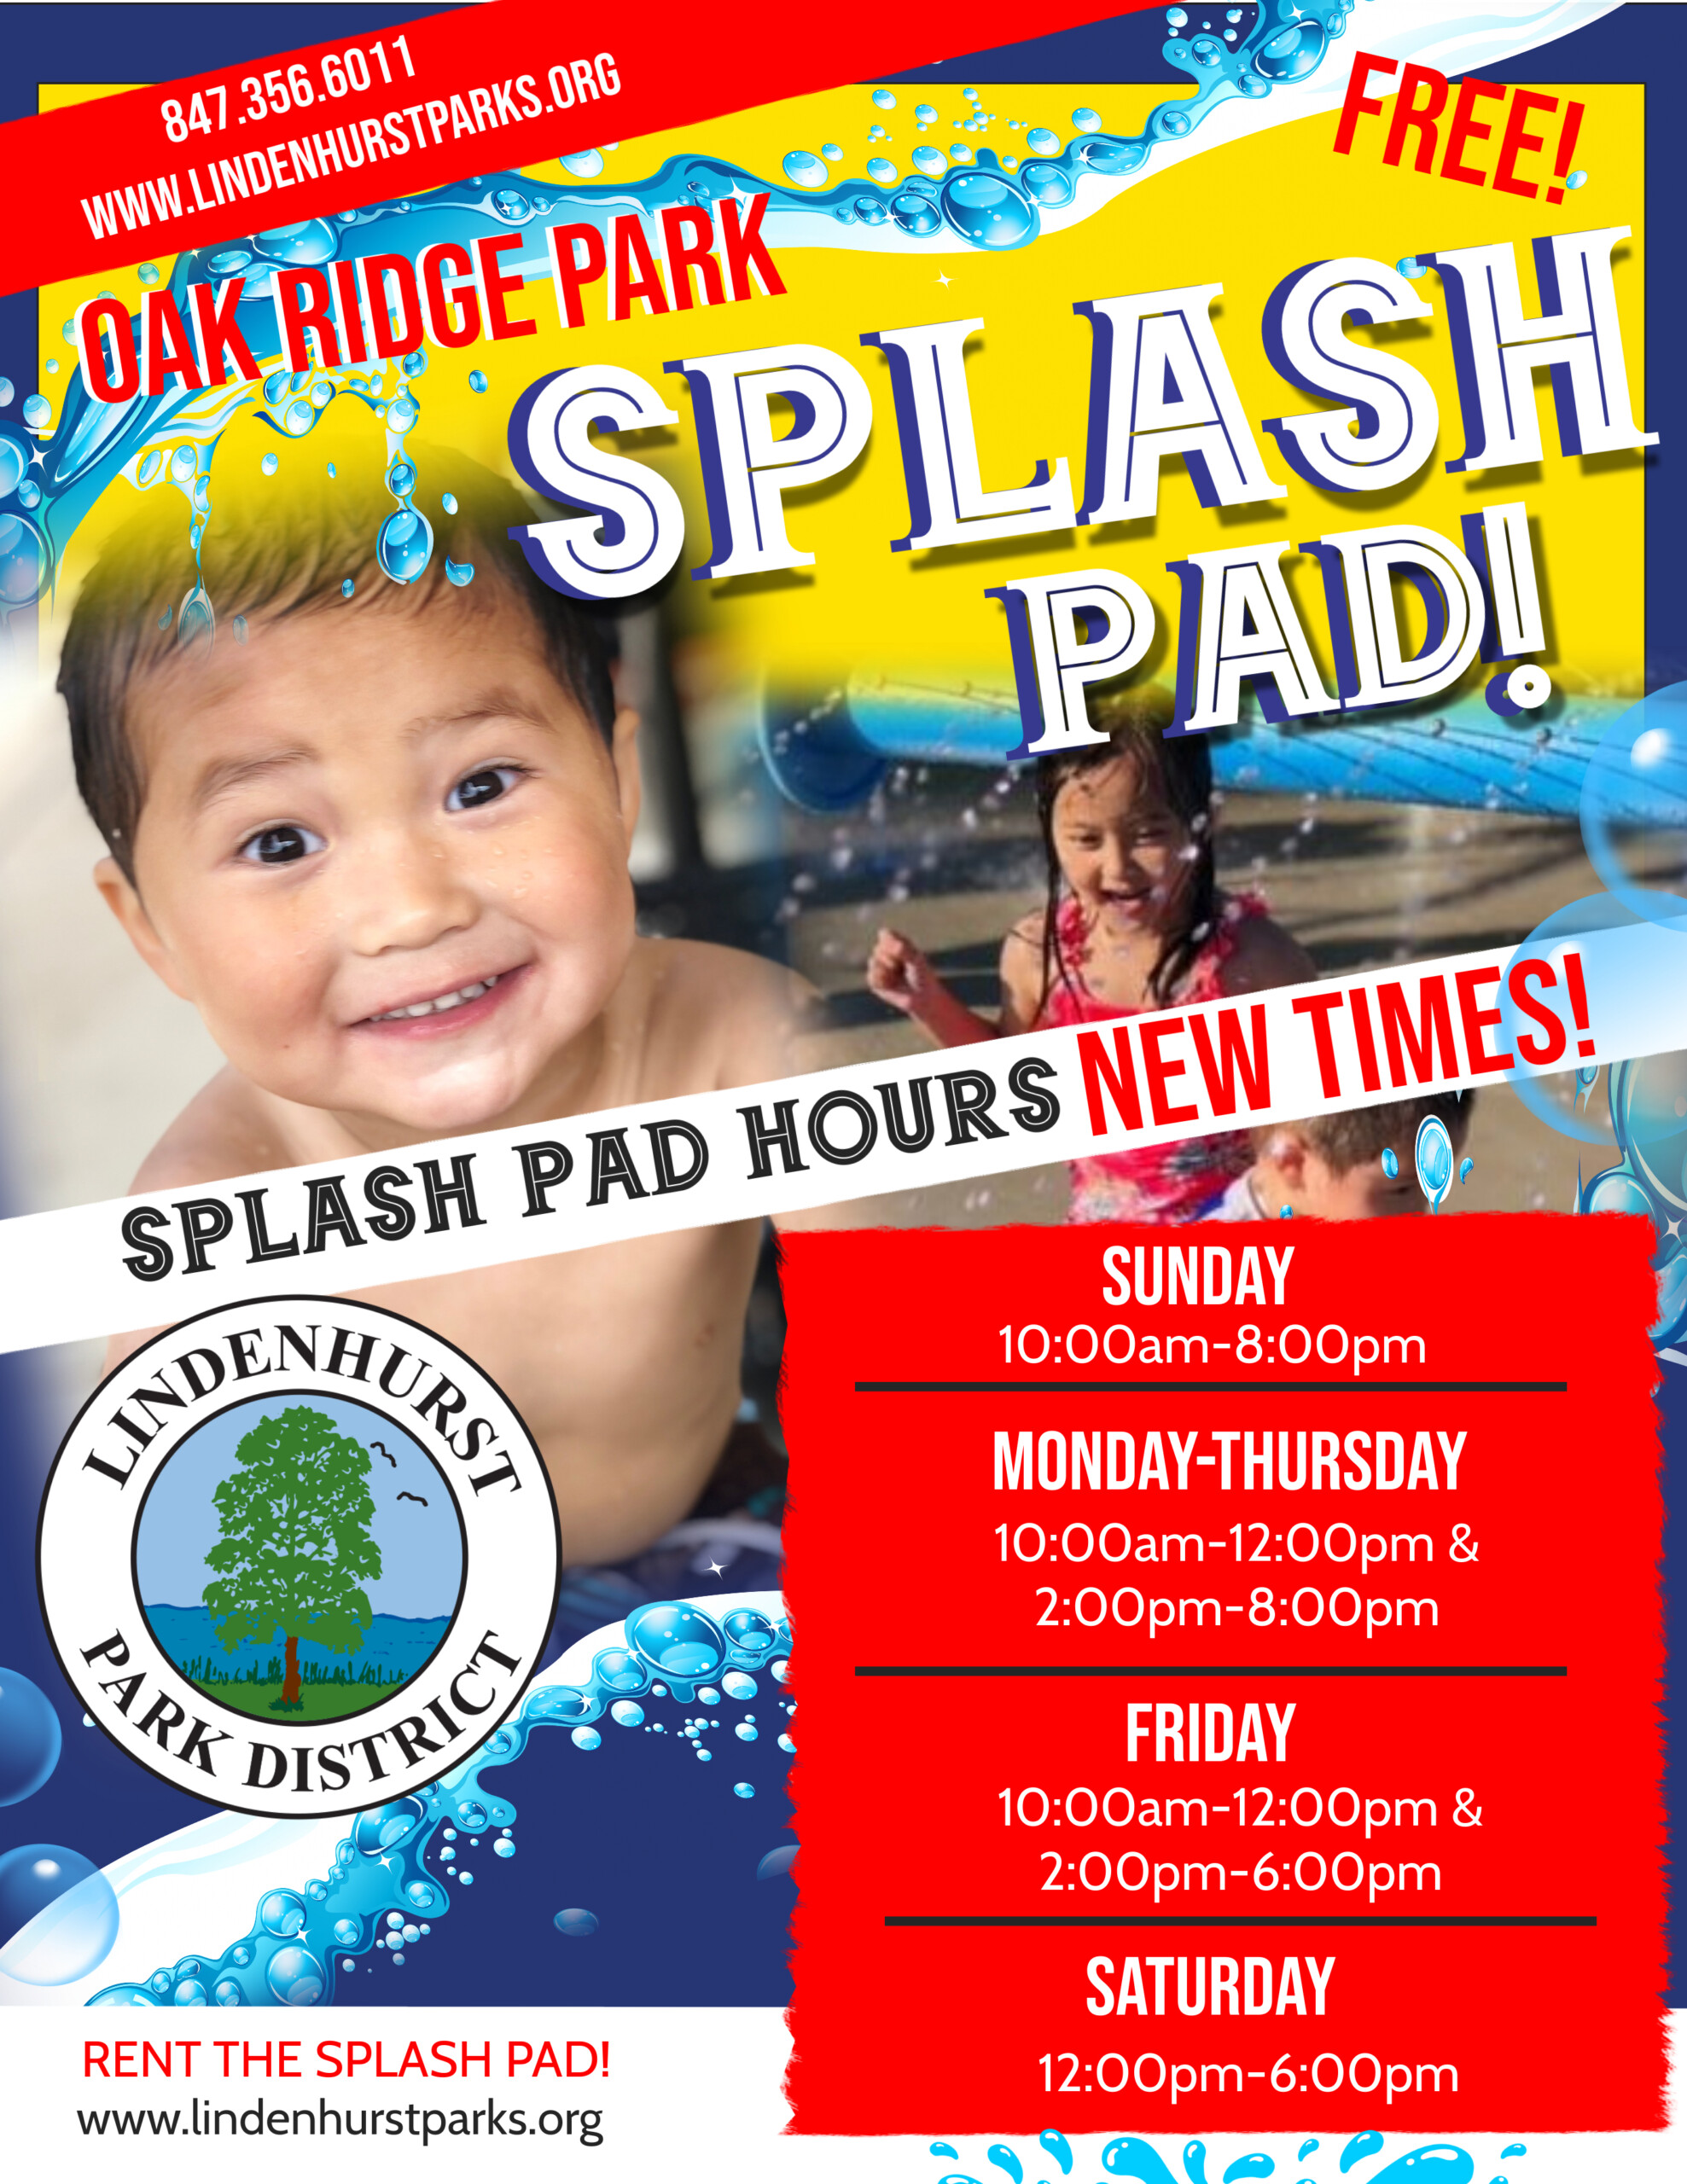 A flyer advertising the free "SPLASH PAD!" at Oak Ridge Park, part of the Lindenhurst Park District, with a joyful image of a child playing in the water. It announces new splash pad hours for different days of the week, including extended hours on Sundays and split hours on weekdays, with the option to rent the splash pad. Contact details for the park district are prominently displayed